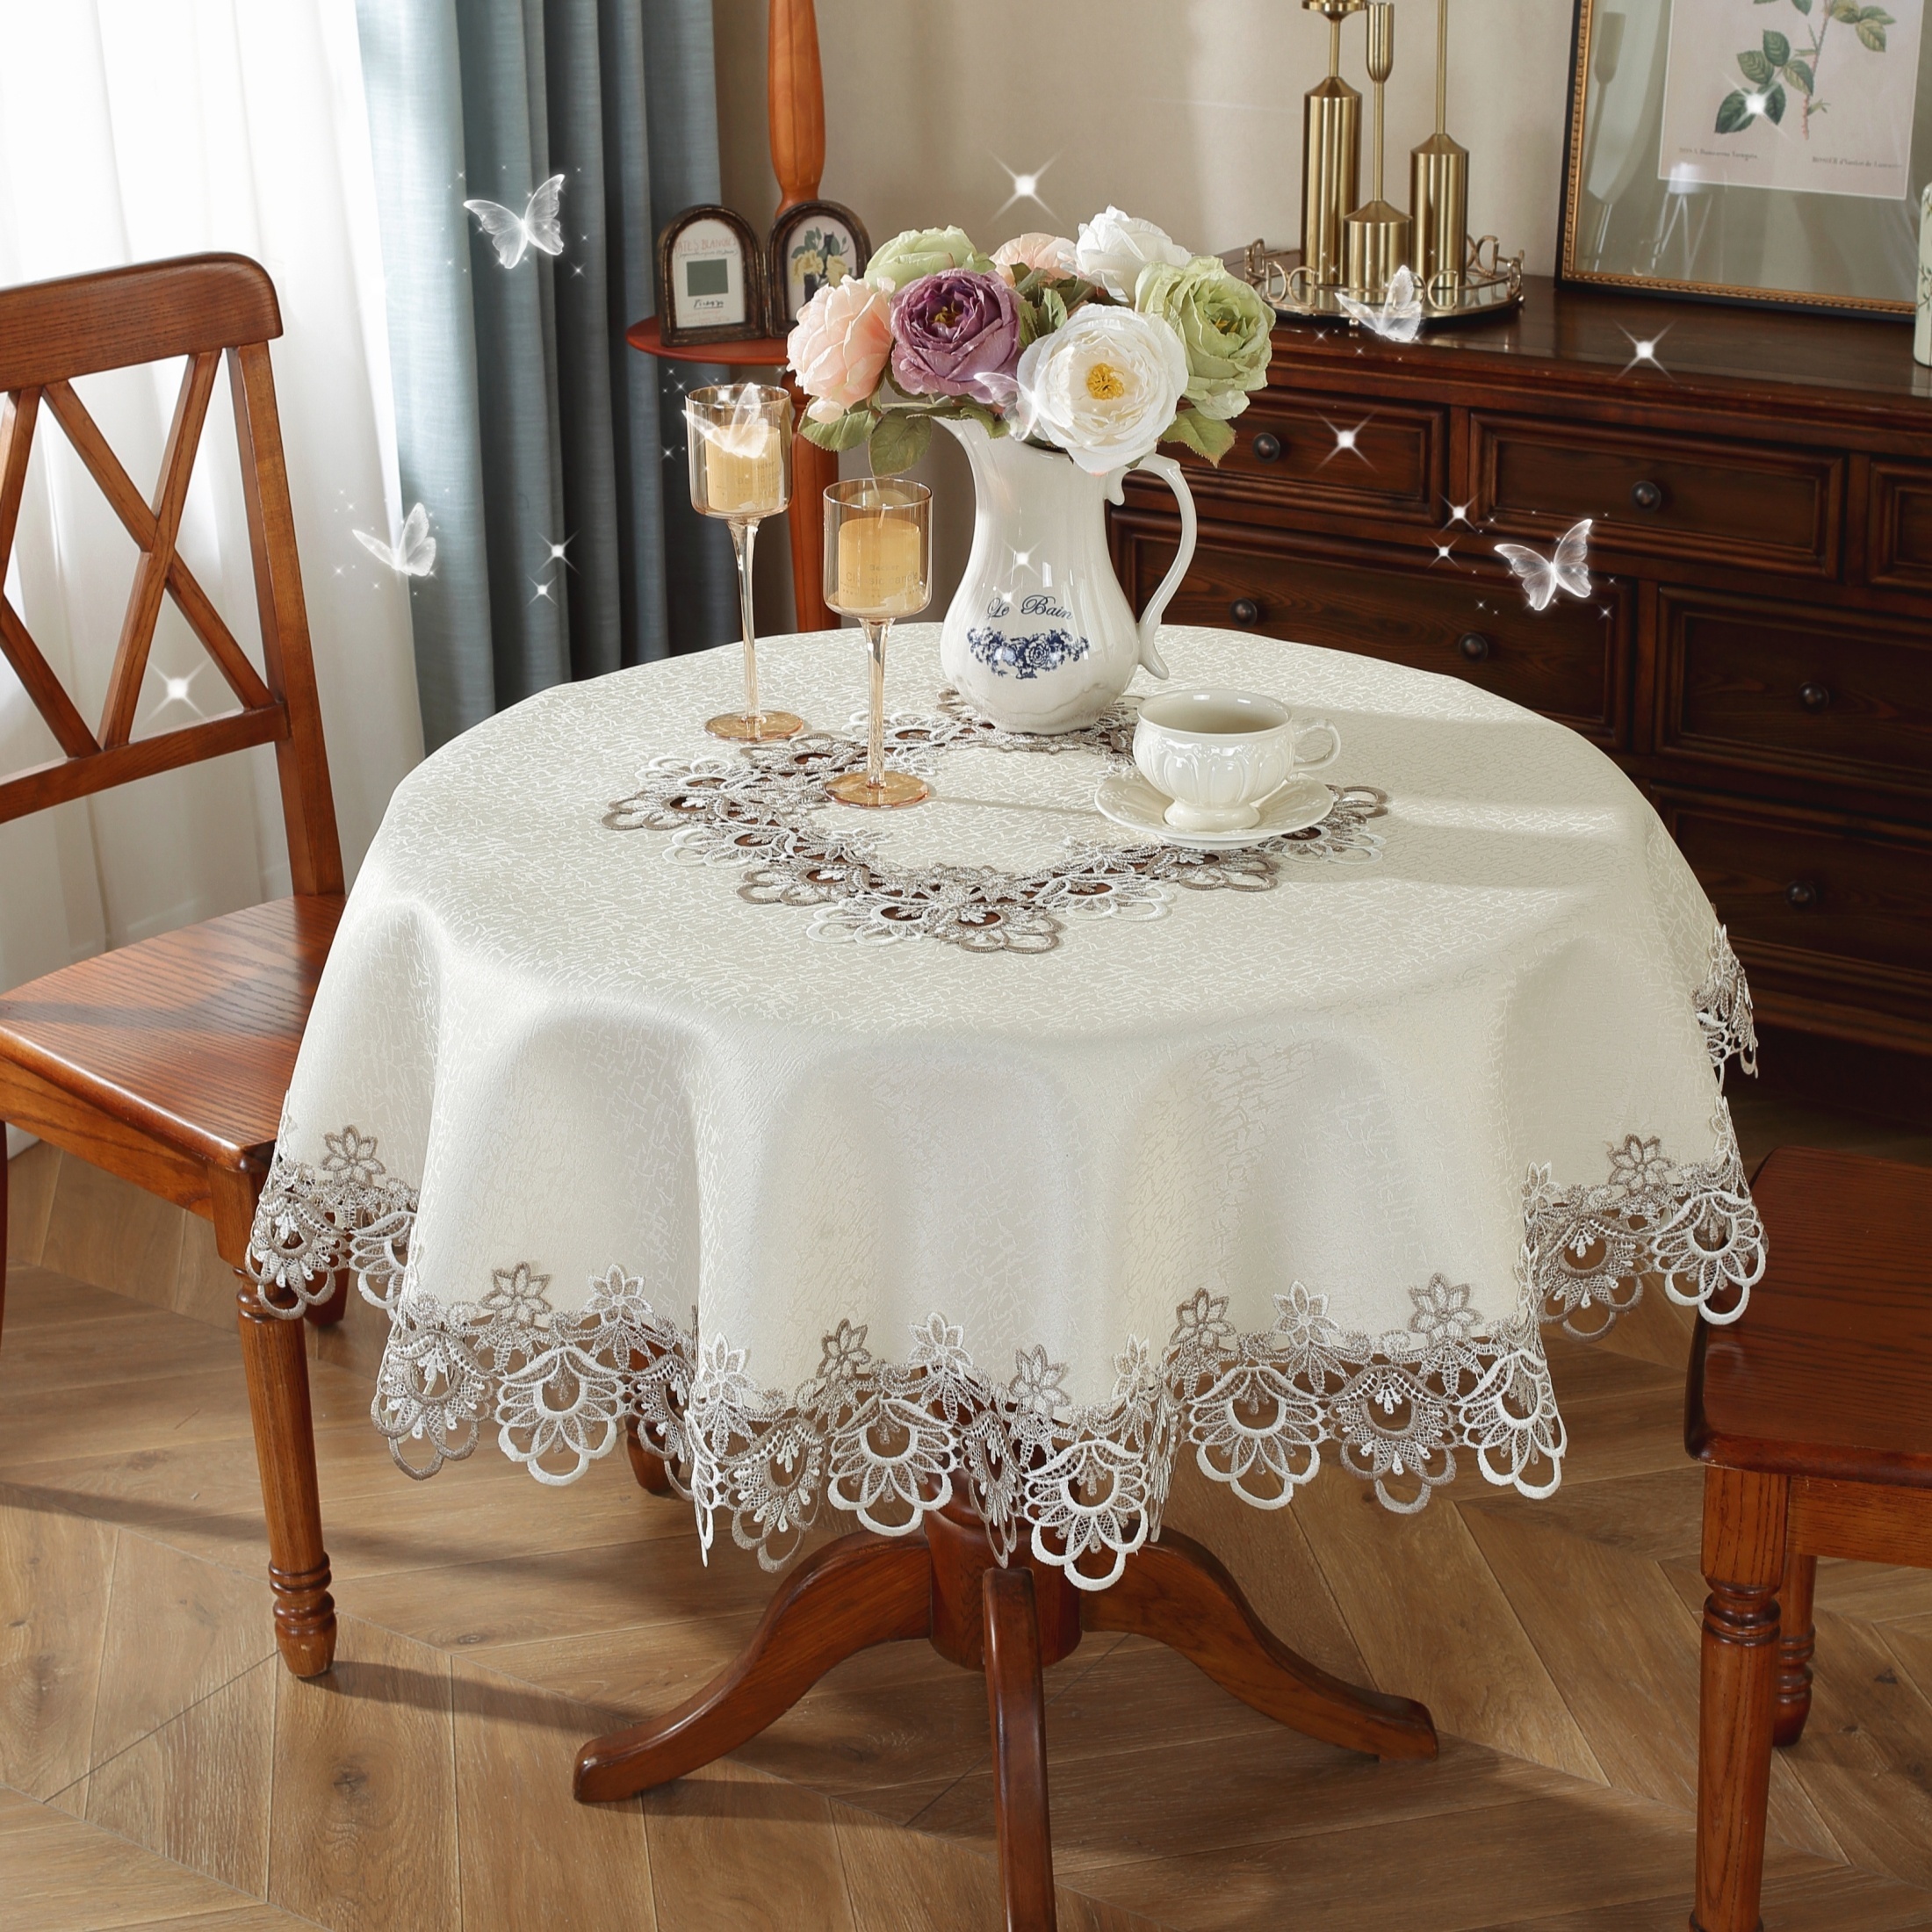 

Round Table Cloth: 1pc Polyester White Tree Bark Wrinkle Embroidery With Double Color Lace Trim - Suitable For Kitchen, Living Room, Bedroom, Picnics, Parties, And Weddings